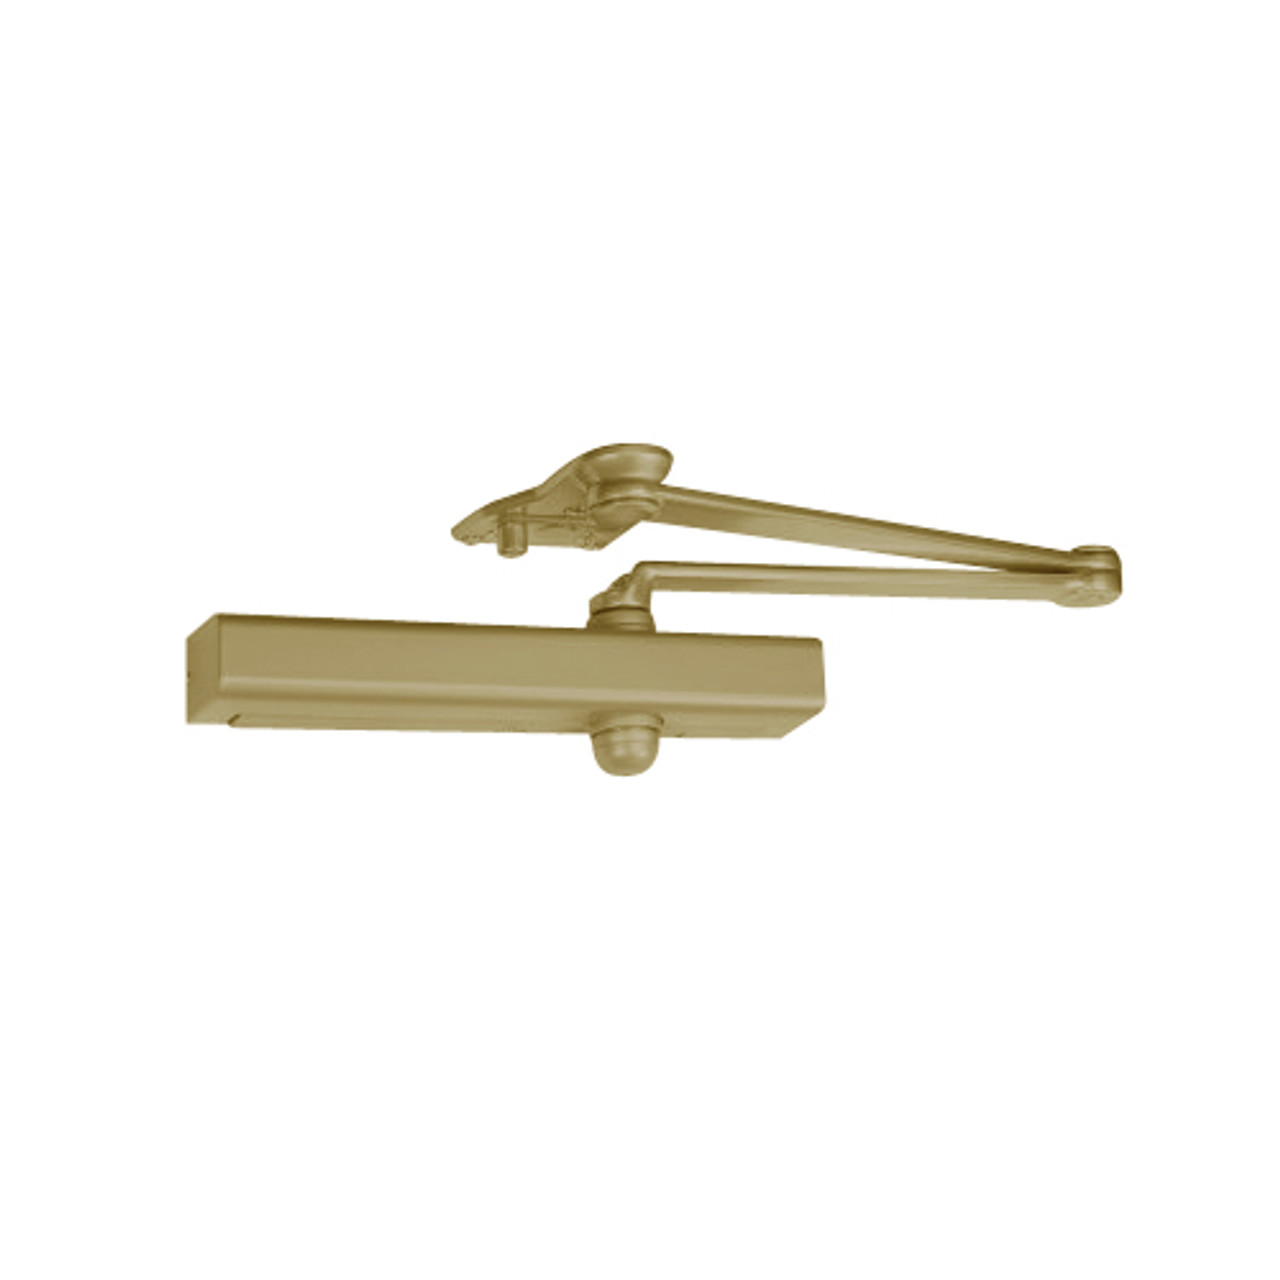 CLP8301DA-696 Norton 8000 Series Non-Hold Open Door Closers with CloserPlus Arm in Gold Finish